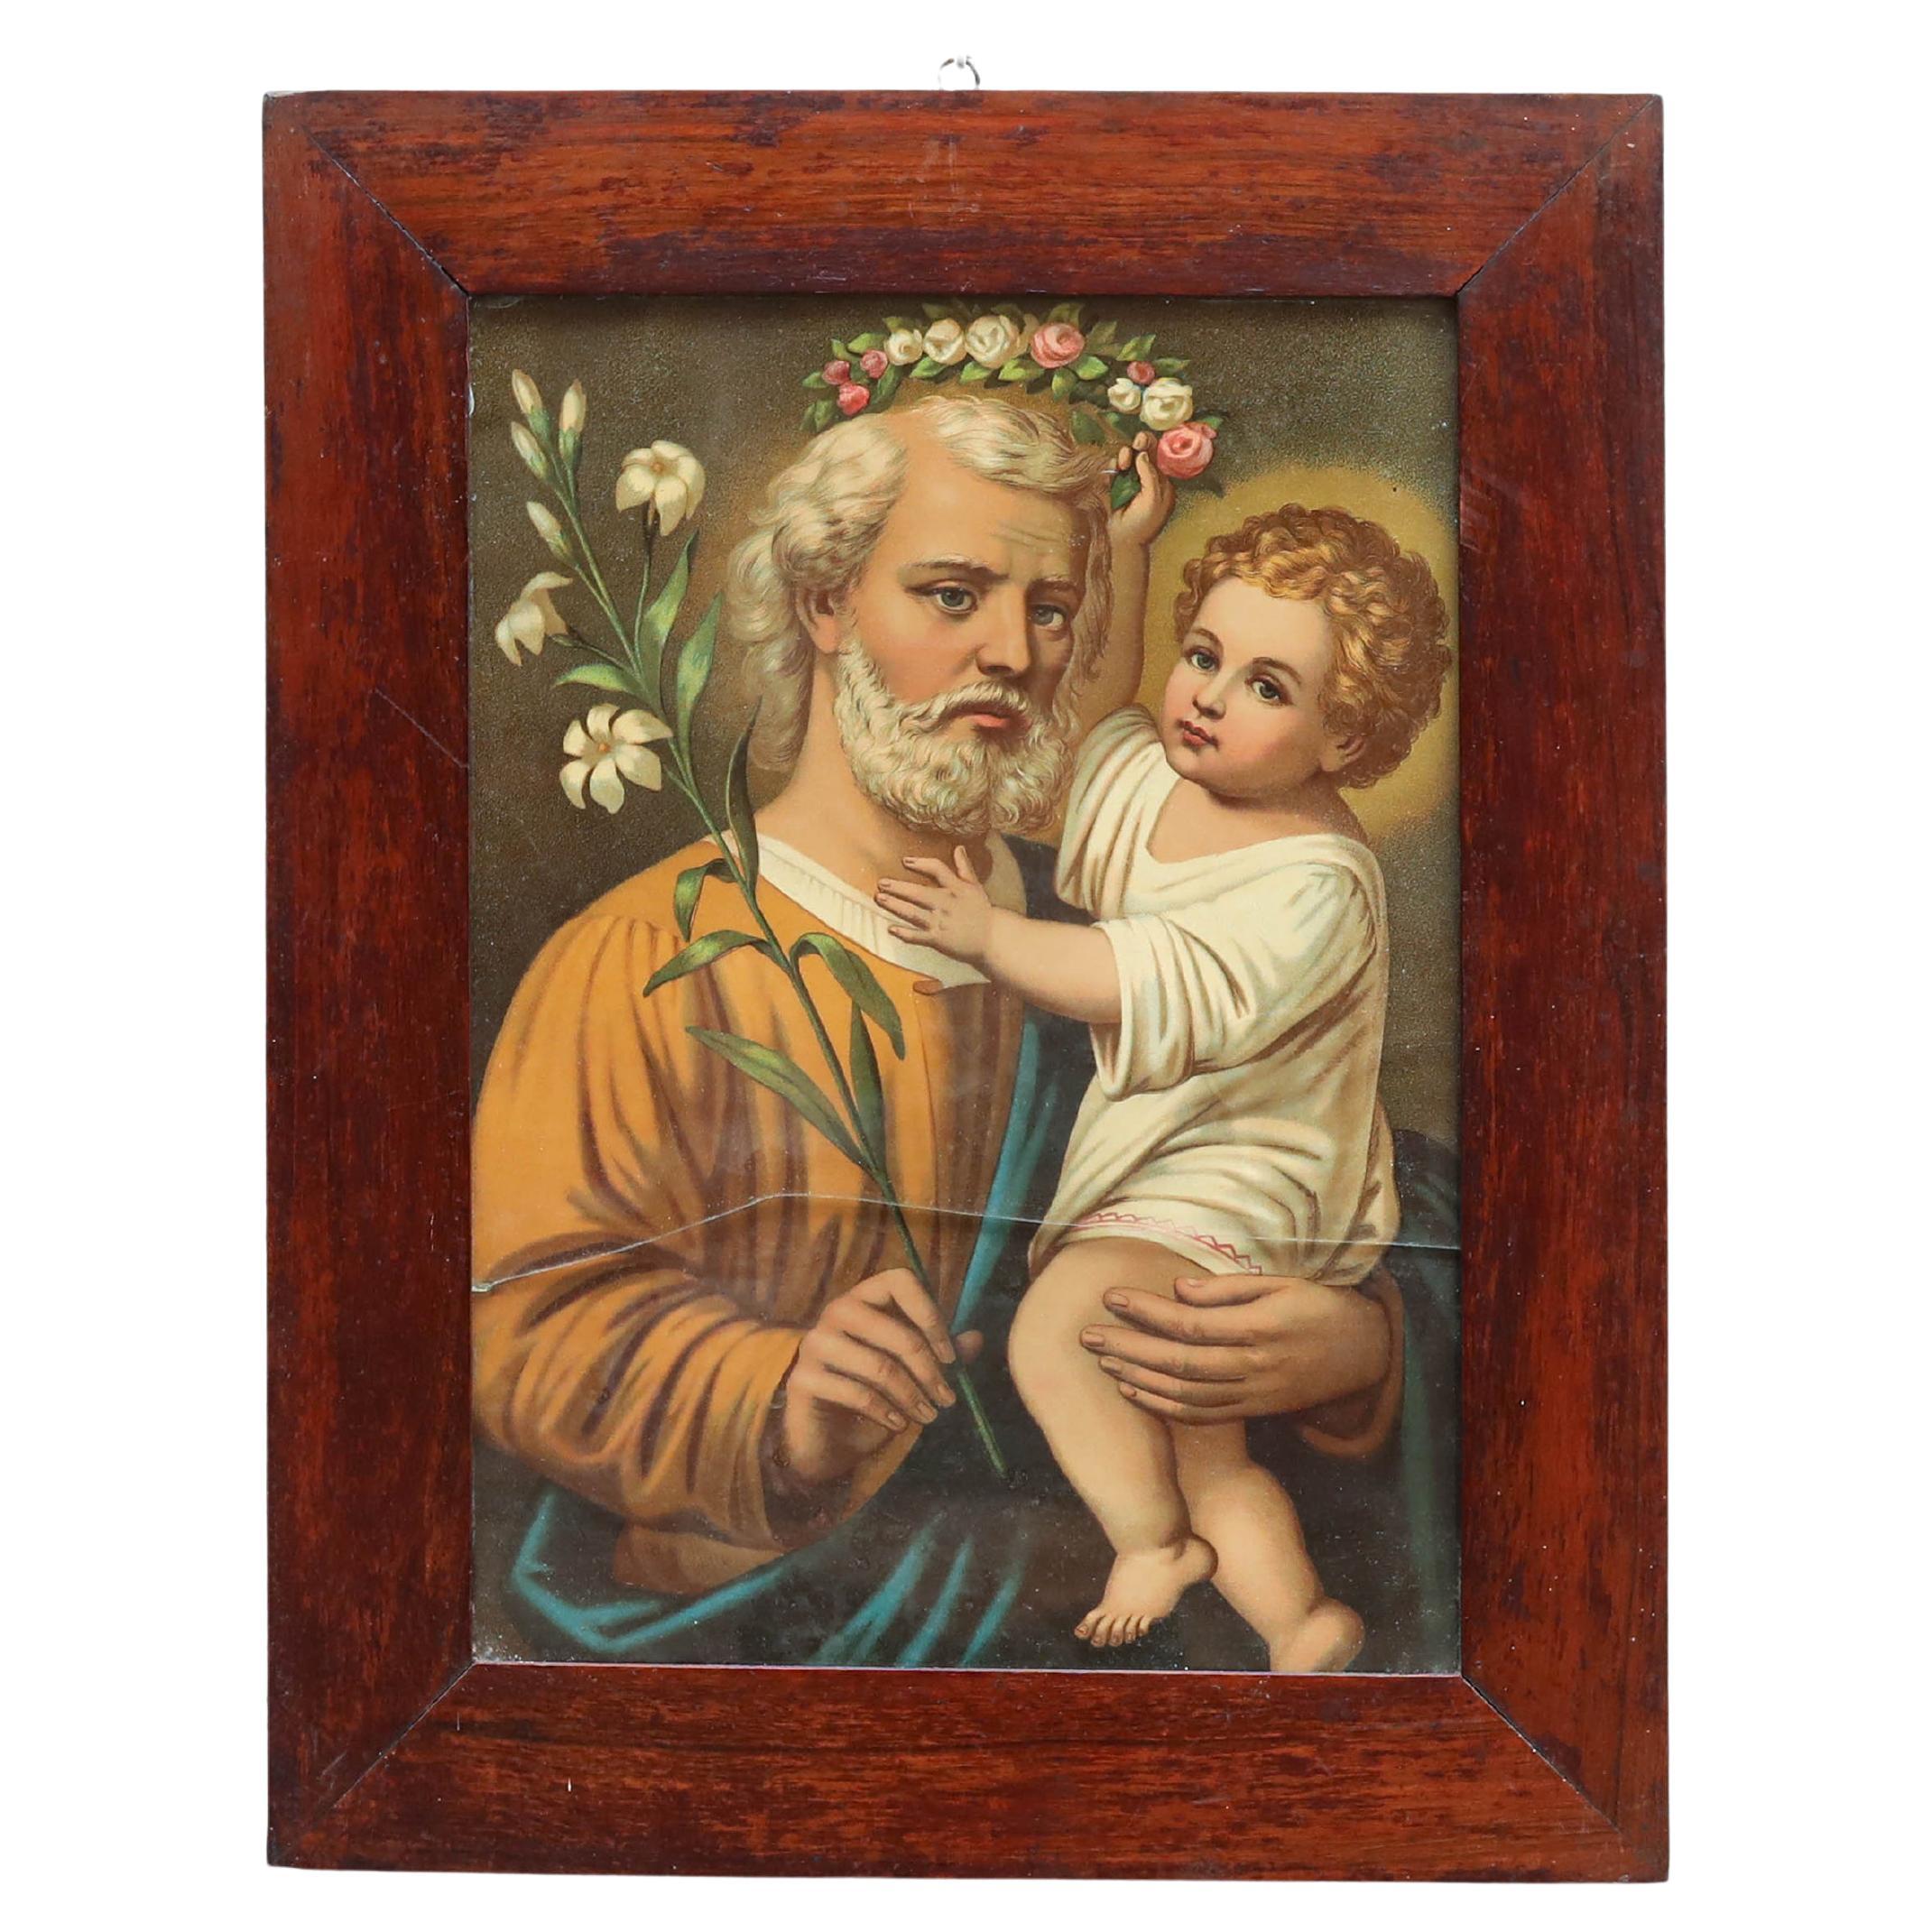 Framed Color Print of Saint and Child, circa 1940 